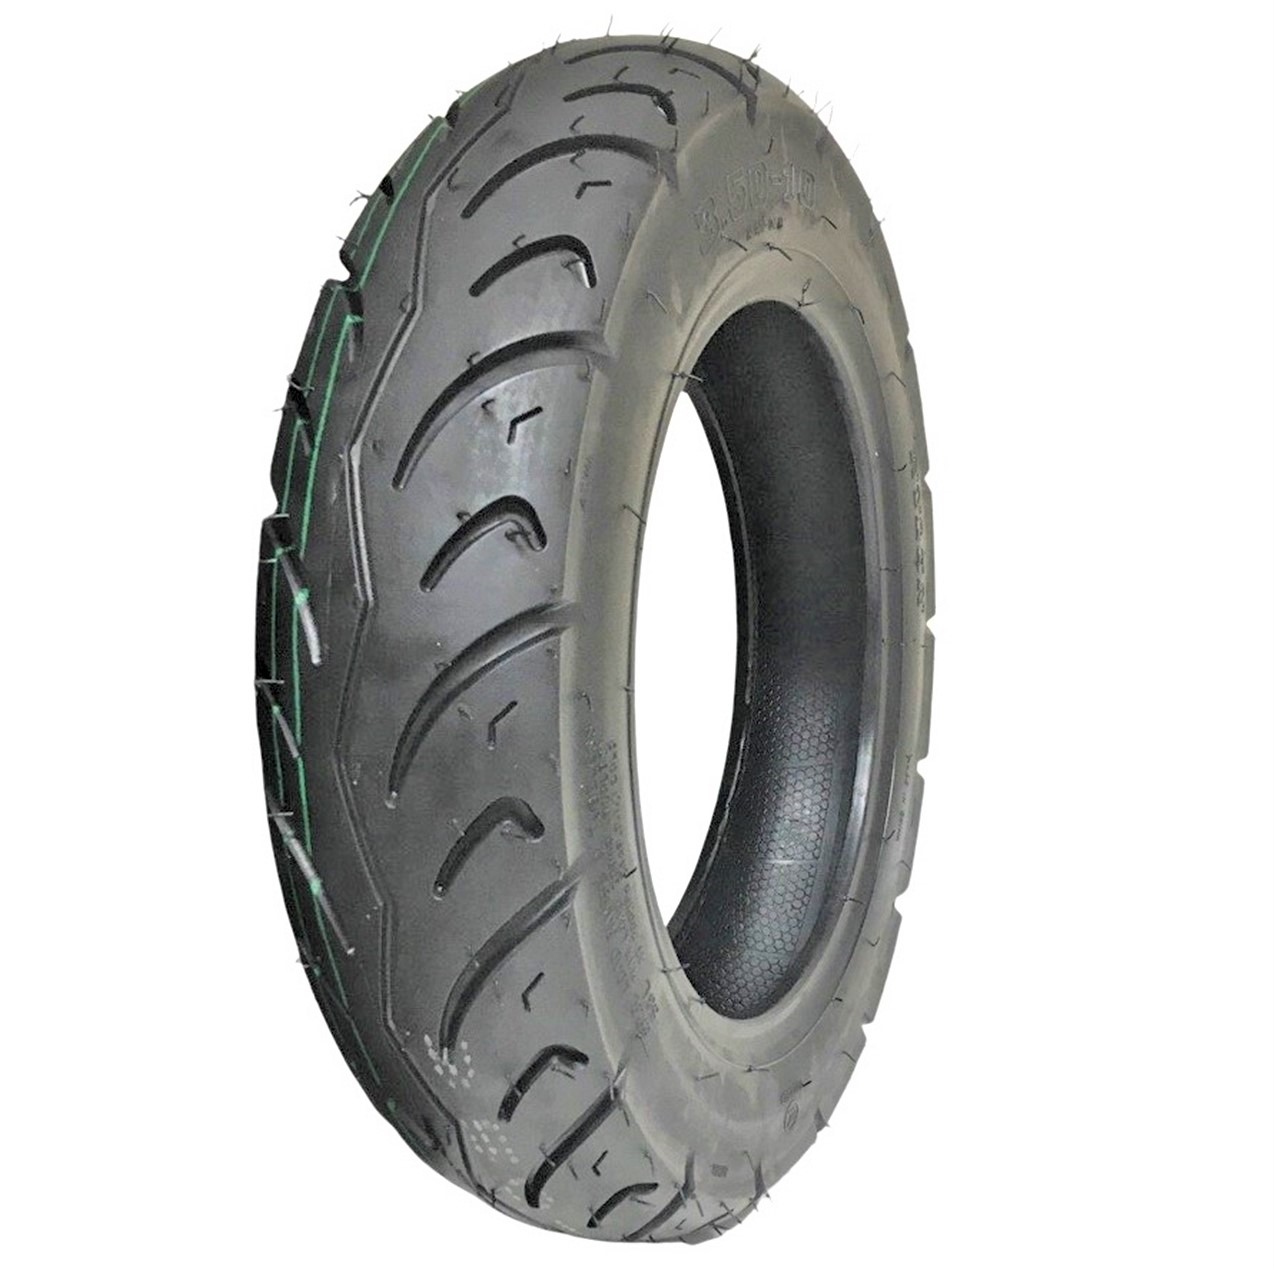 TIRE (10") 3.50x10 TL Scooter Tire - Click Image to Close